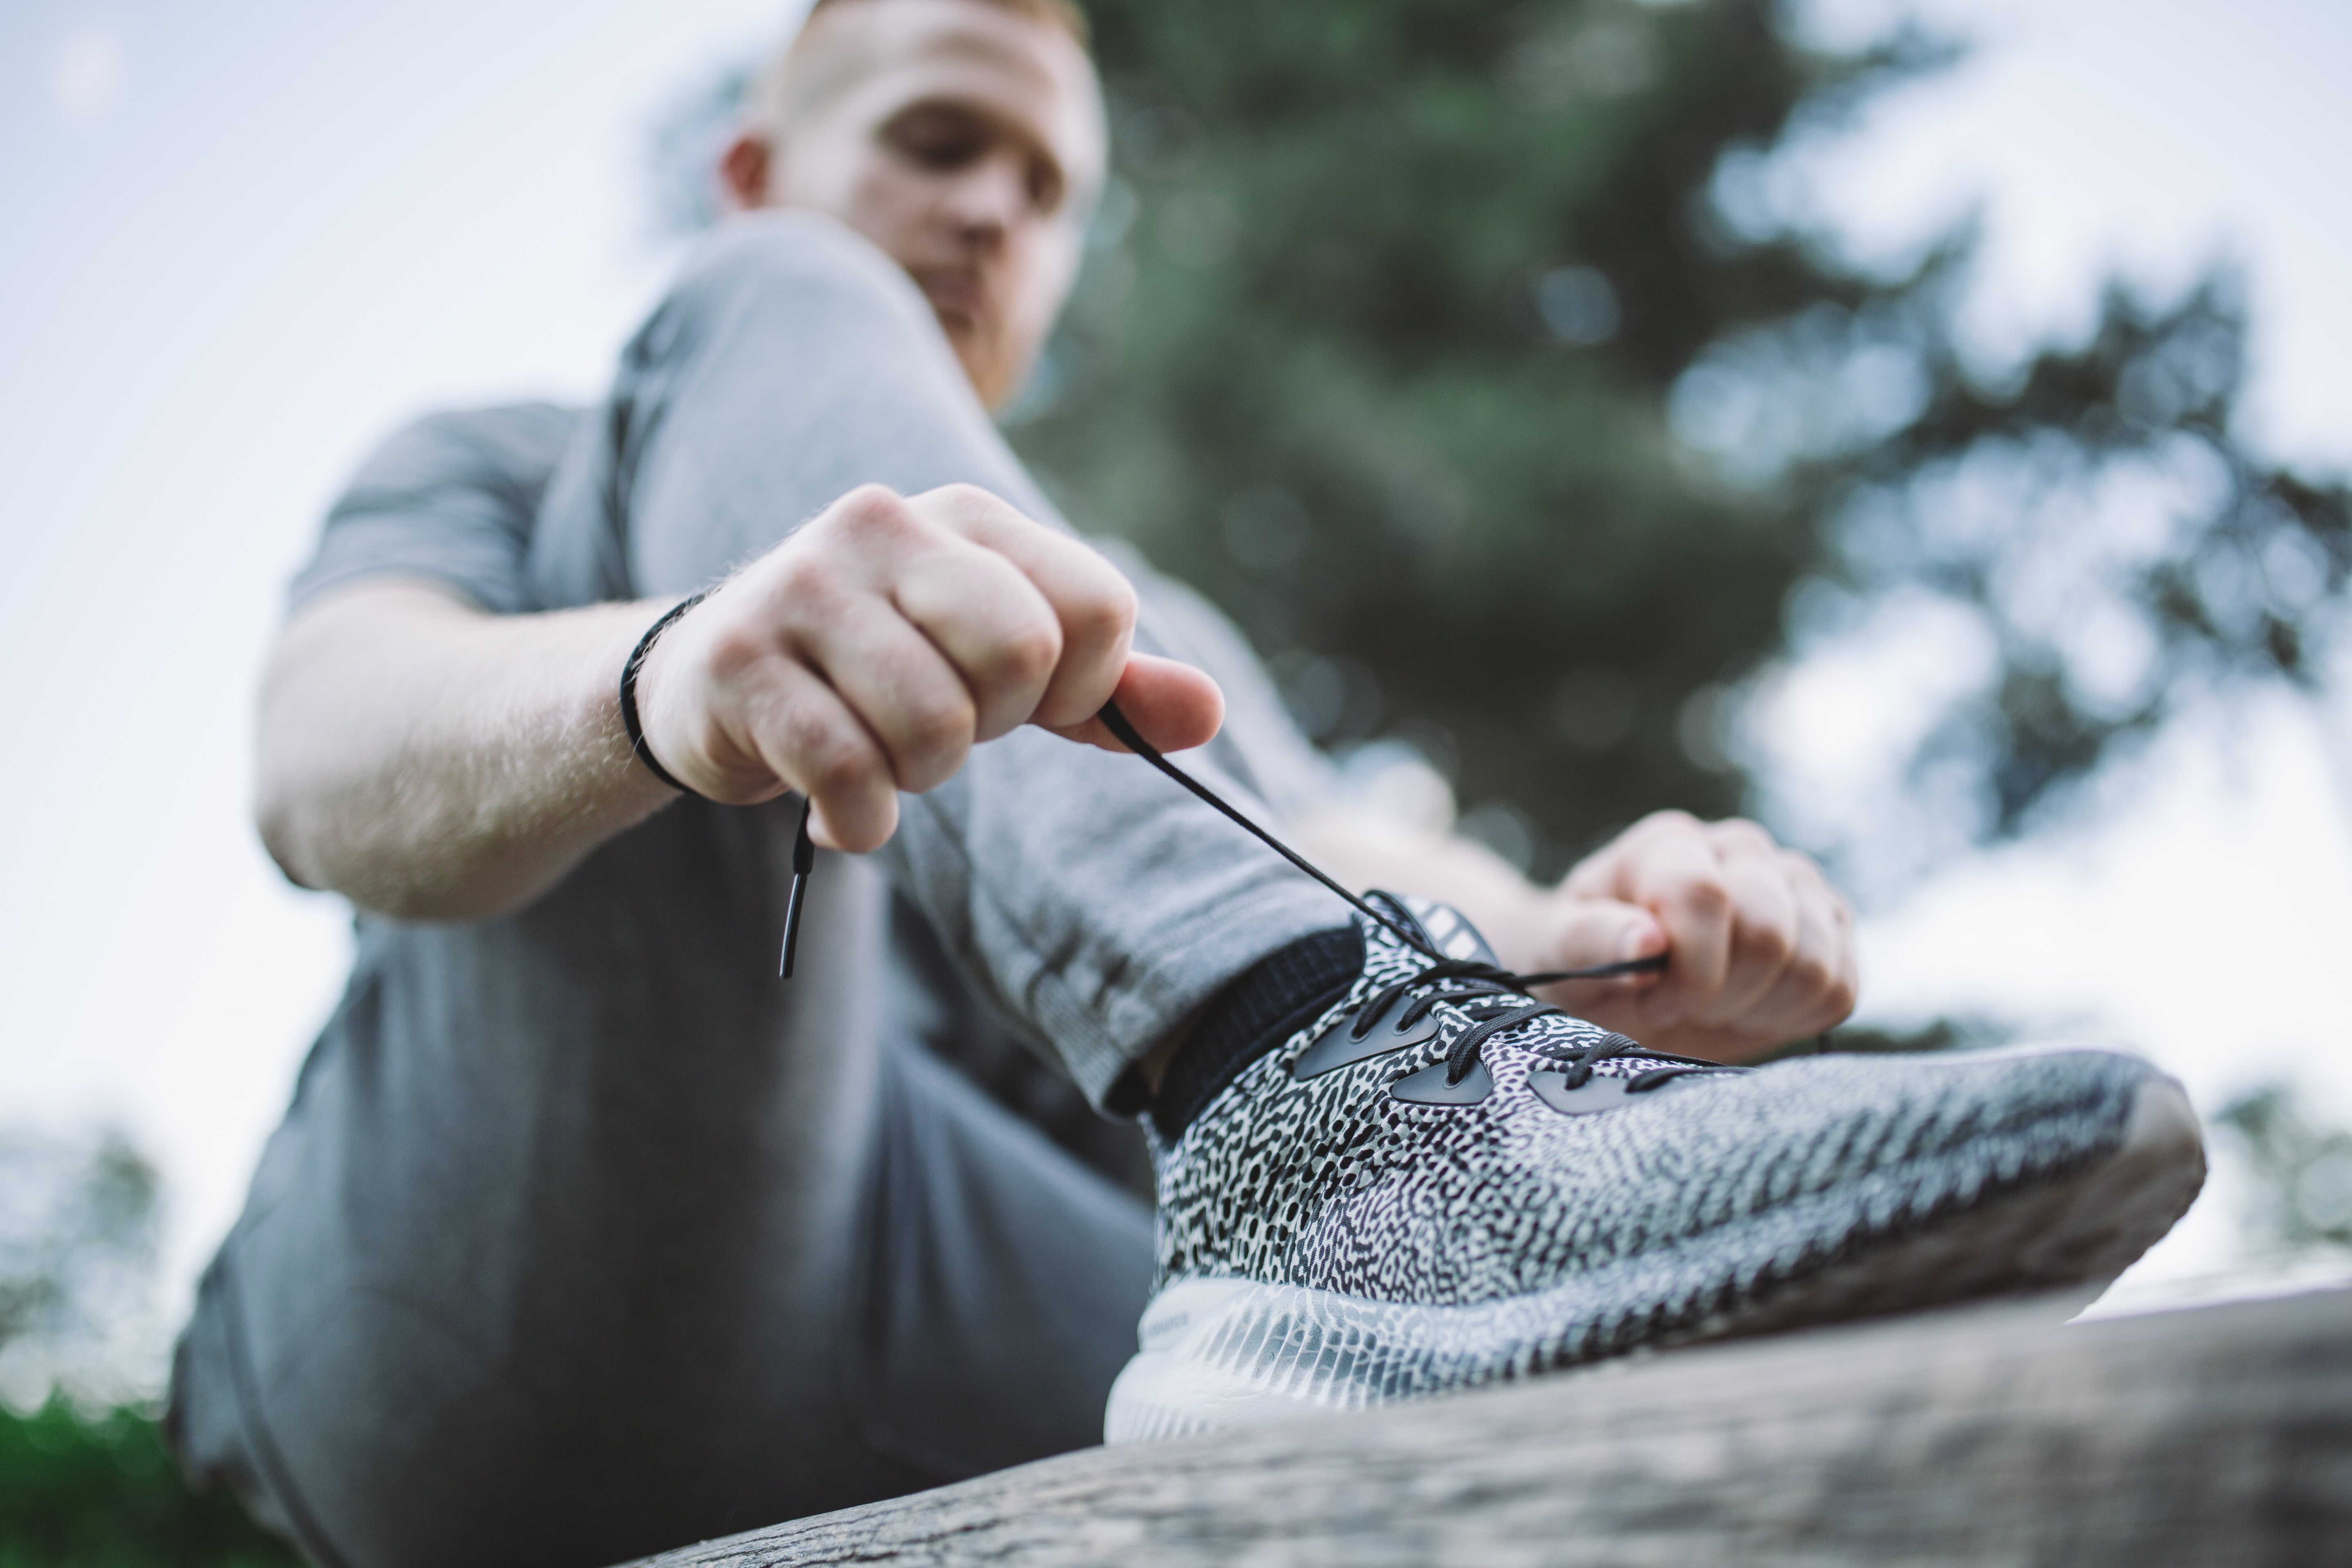 Taking adidas AlphaBOUNCE for Test Spin